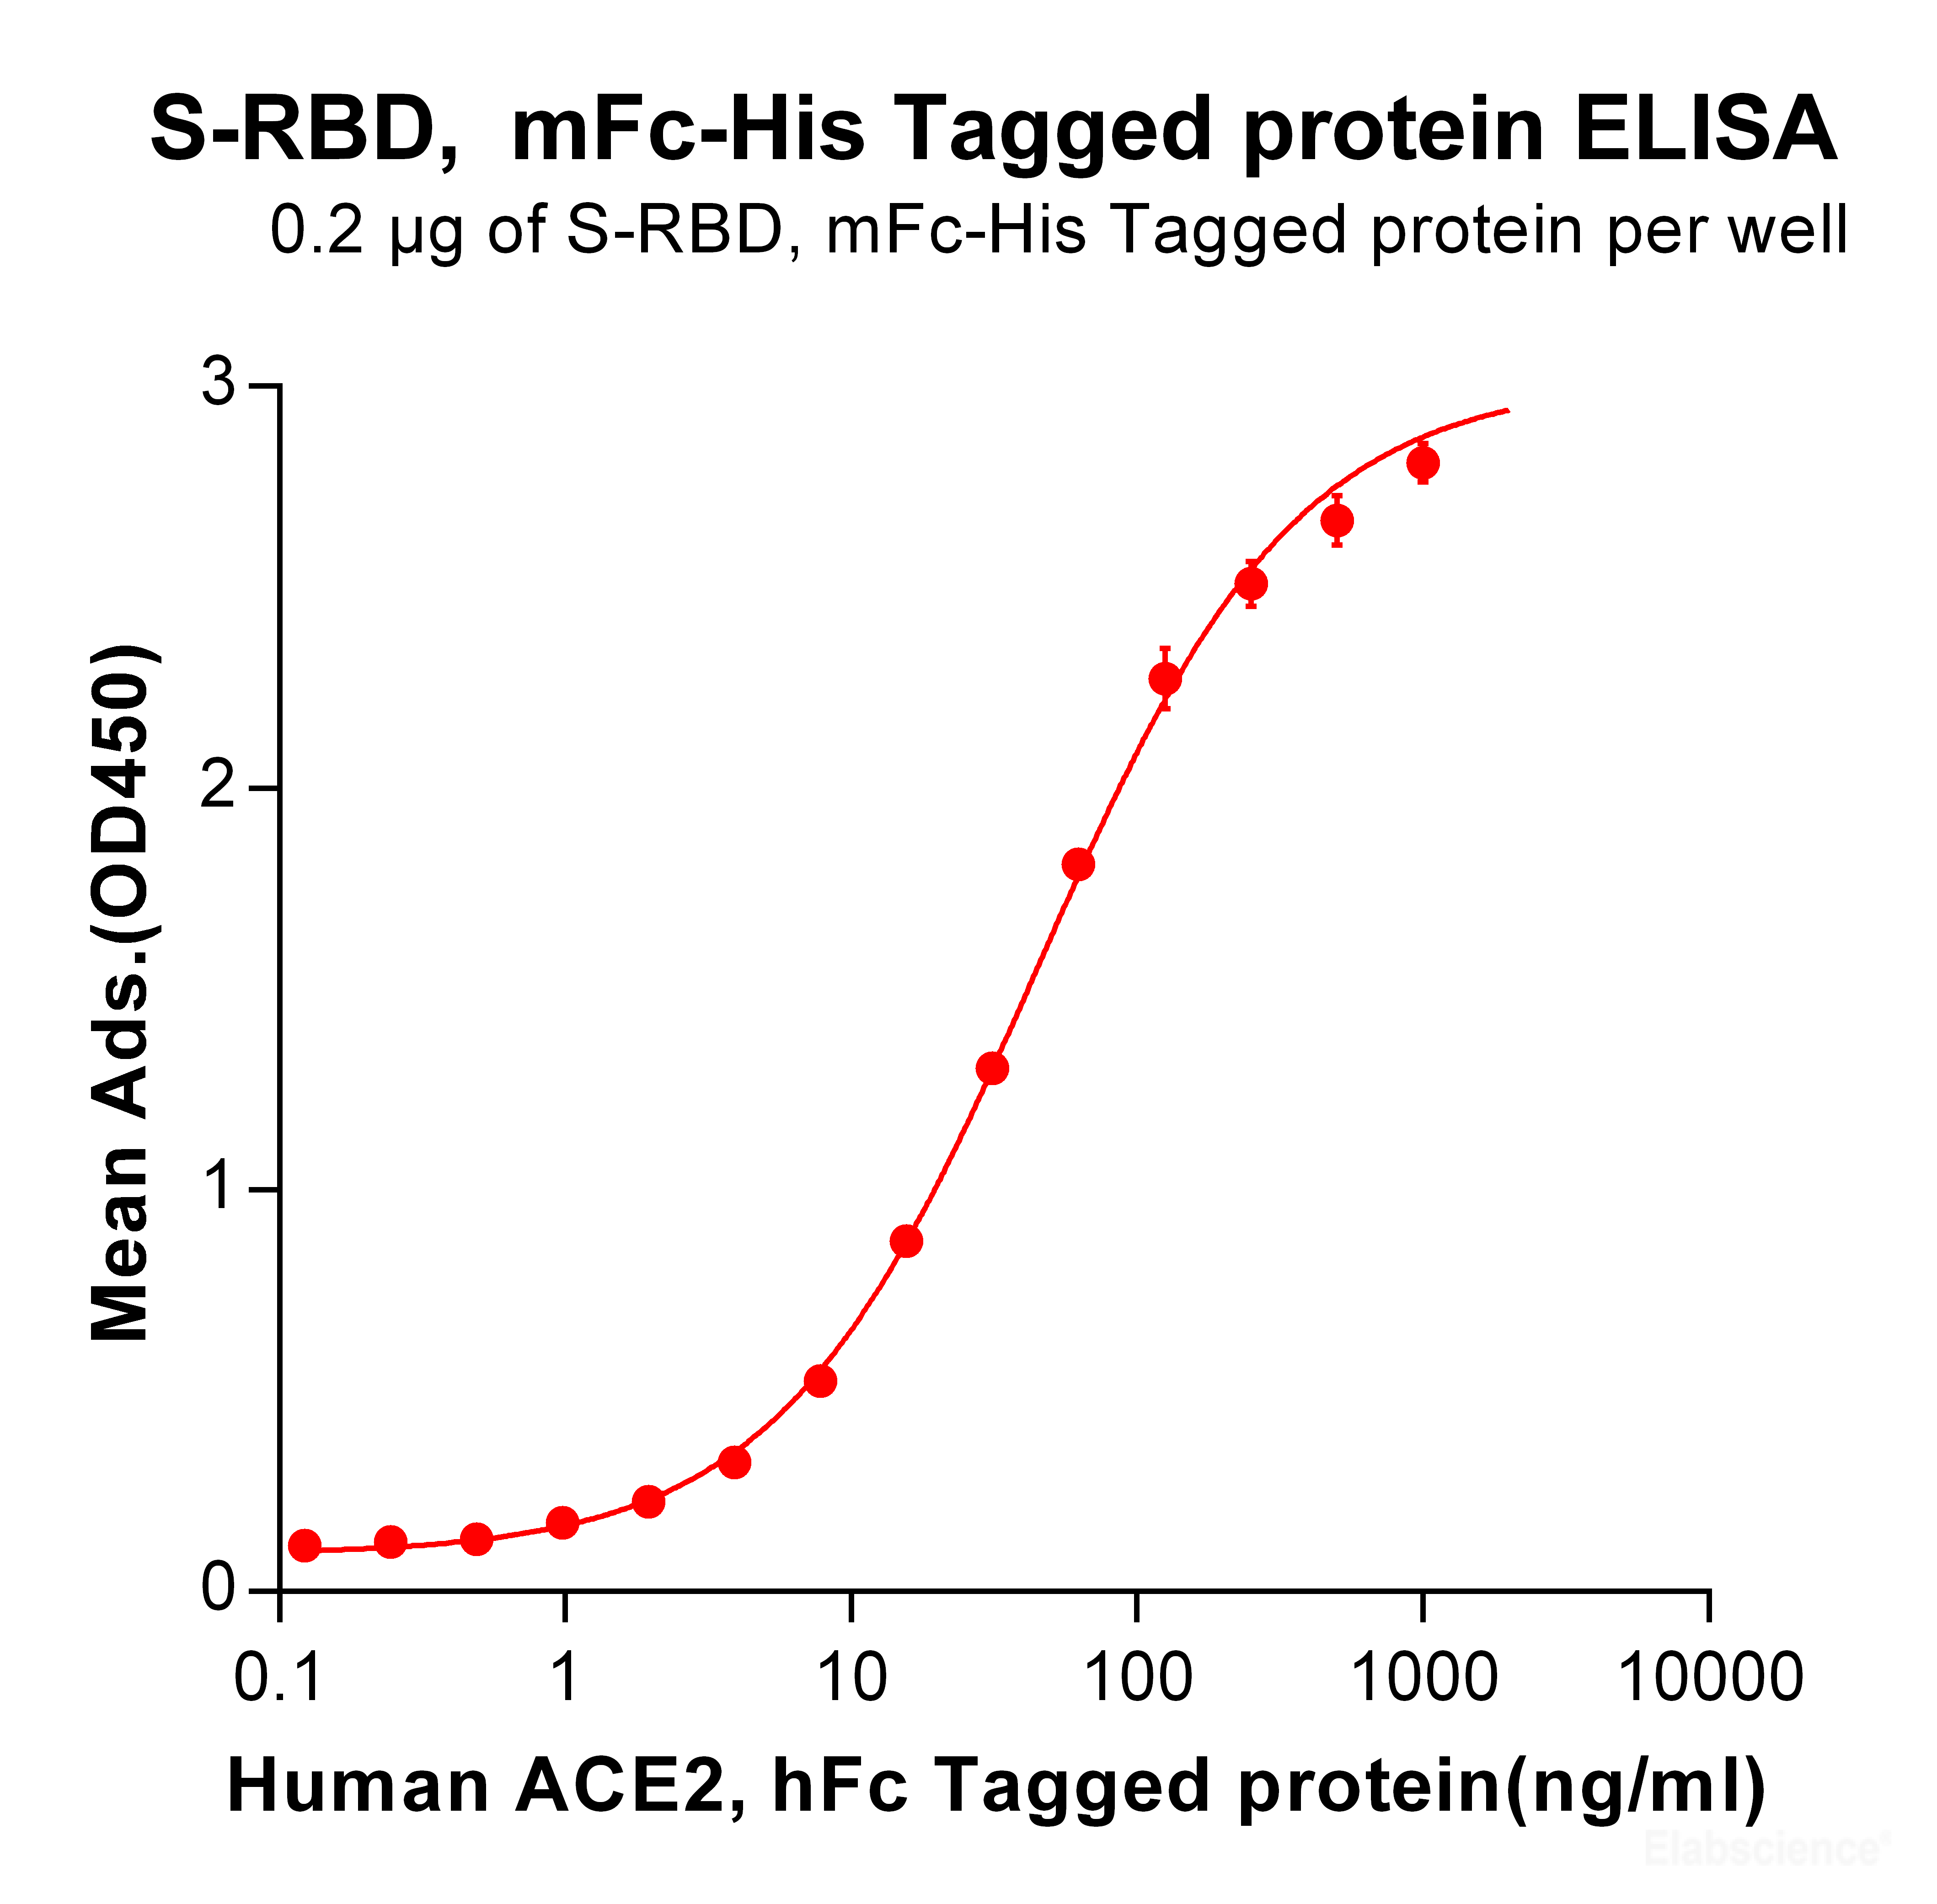 2.ELISA plate pre-coated by 2 μg/ml (100 μl/well) S-RBD, mFc-His tagged protein (PKSV030276) can bind Human ACE2, hFc Tagged protein (PKSR030492) in a linear range of 0.488-49.83 ng/ml.